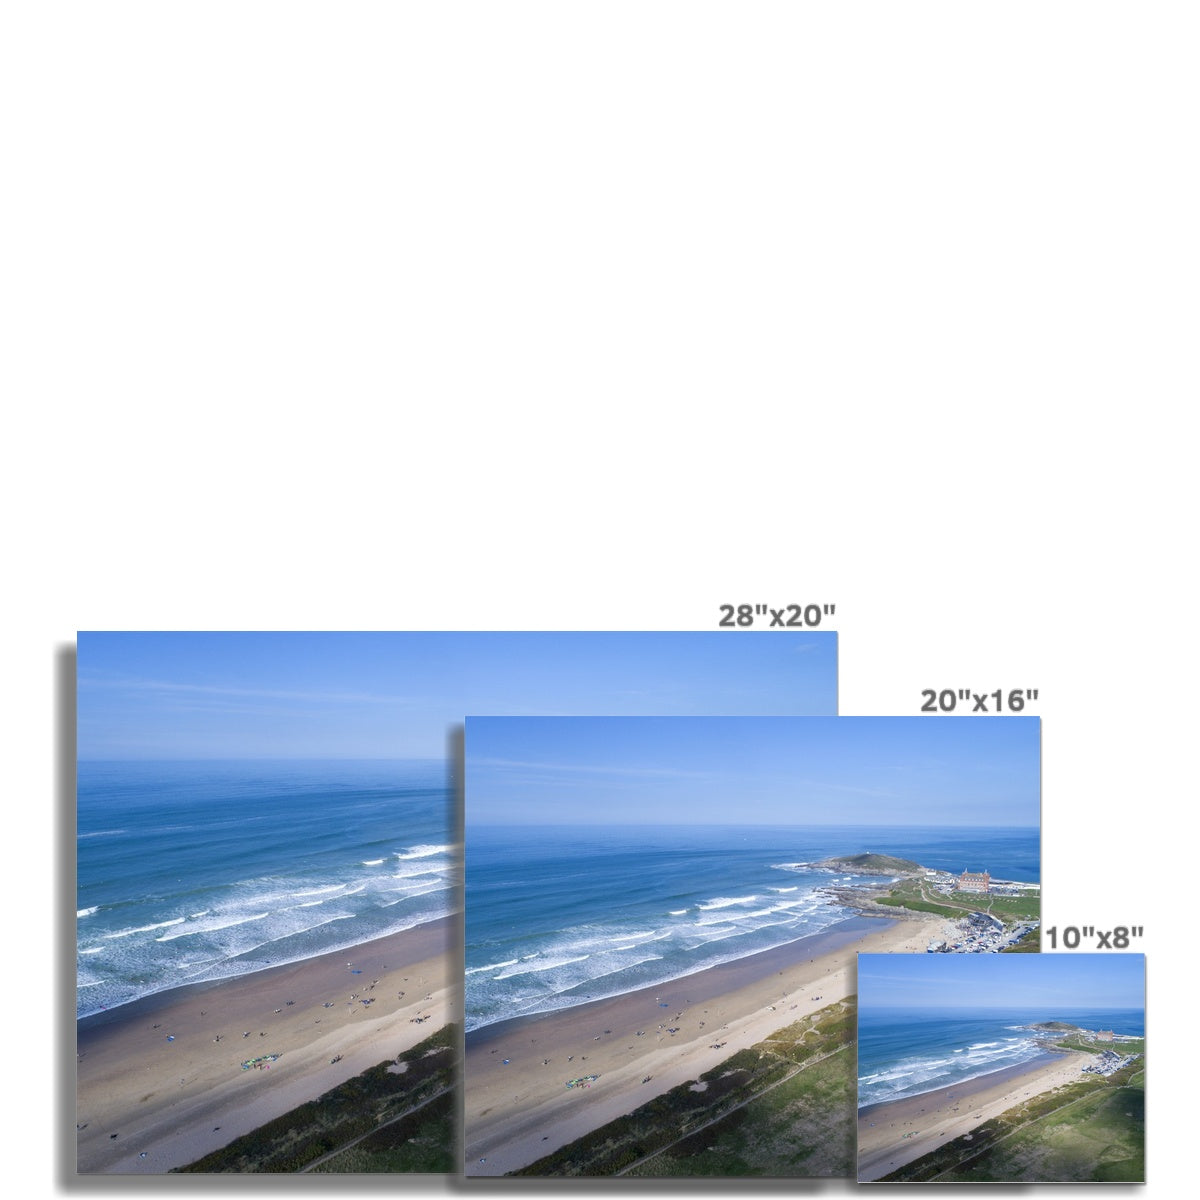 fistral picture sizes